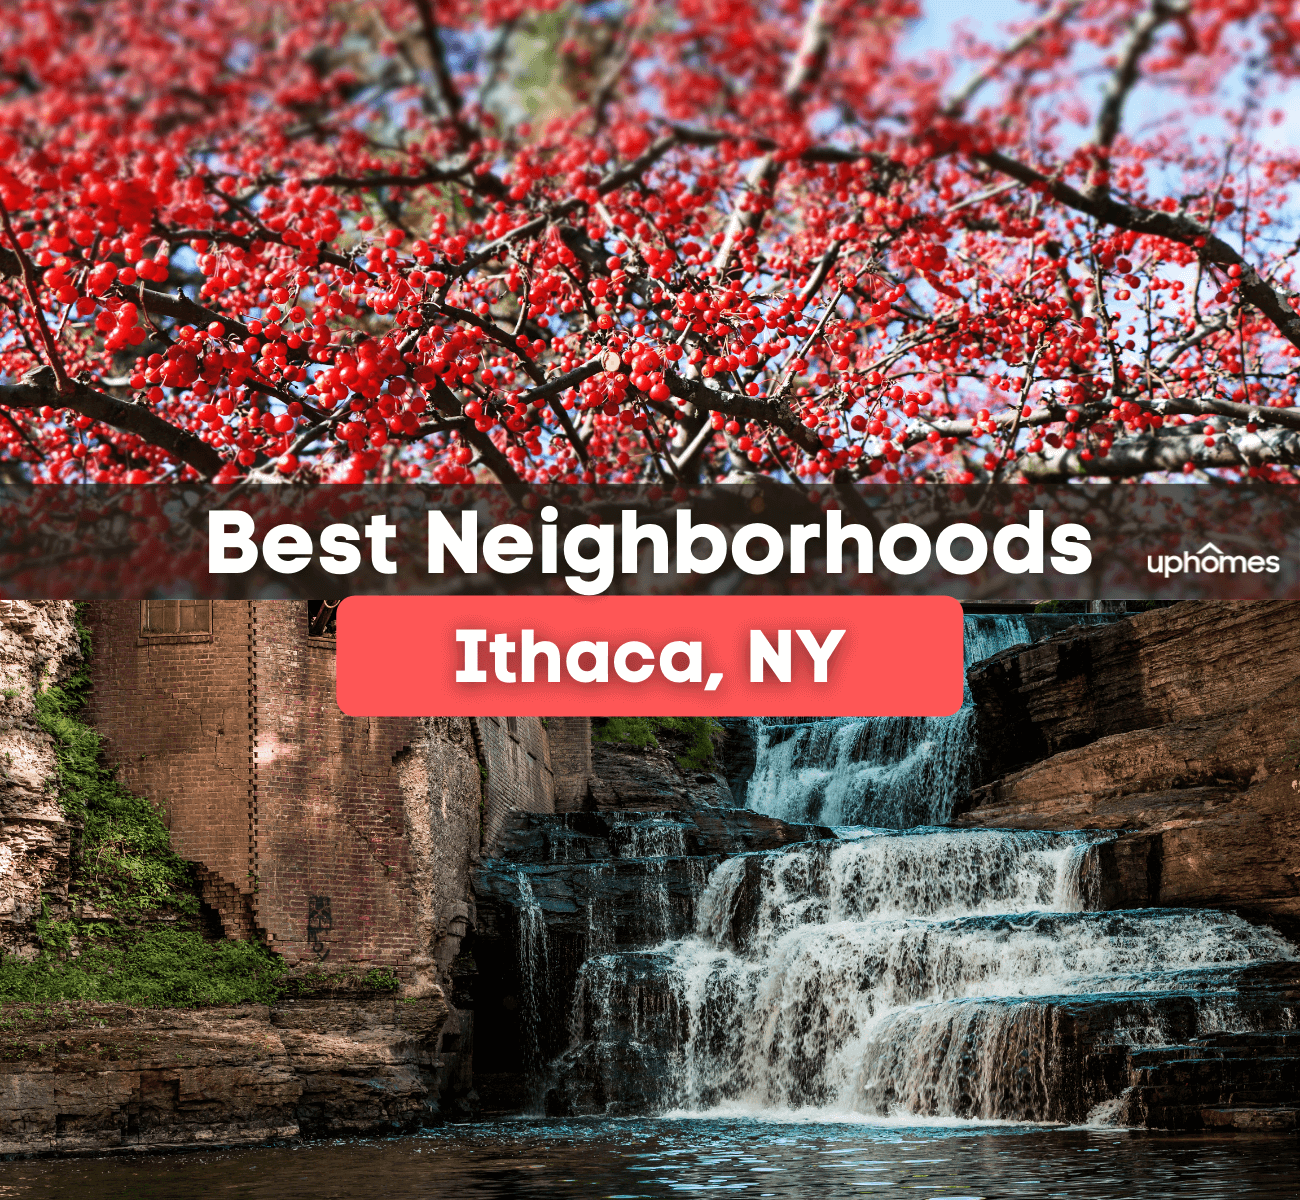 Best Neighborhoods in Ithaca, NY - Here are the Best Places to Live in Ithaca